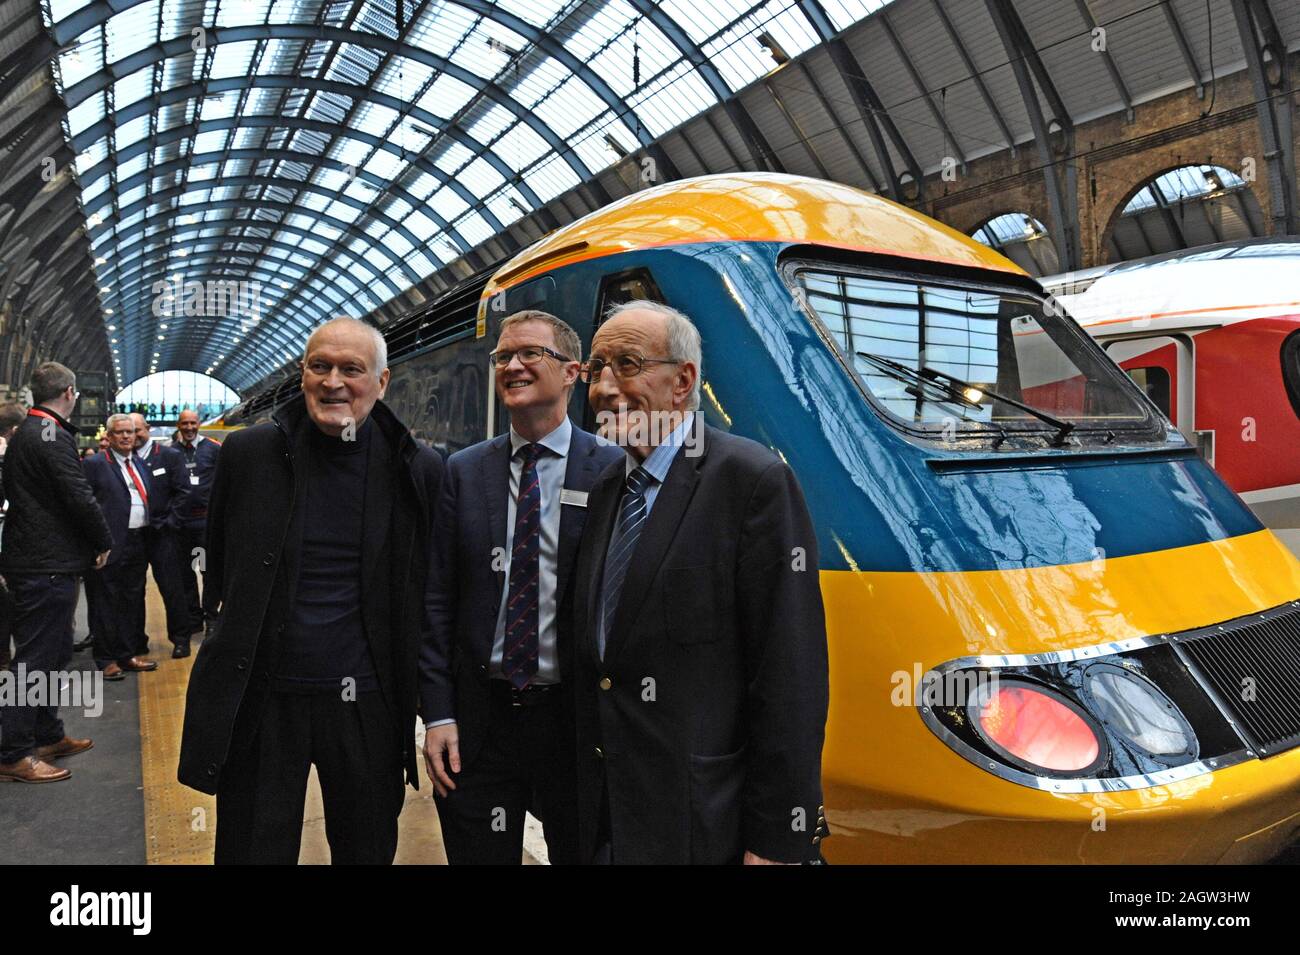 King's Cross Station, London, UK. 21st December 2019. London North Eastern Railway Company restored an InterCity 125 set to its original British Rail livery for a special four-day tour around the LNER network as the trains end 40 years of service on the East Coast Main Line. Sir Kenneth Grange the loco designer poses with LNER MD David Horne and David Russell, BR engineer who introduced HST's to the East Coast Main Line . G.P. Essex/Alamy Live News Stock Photo